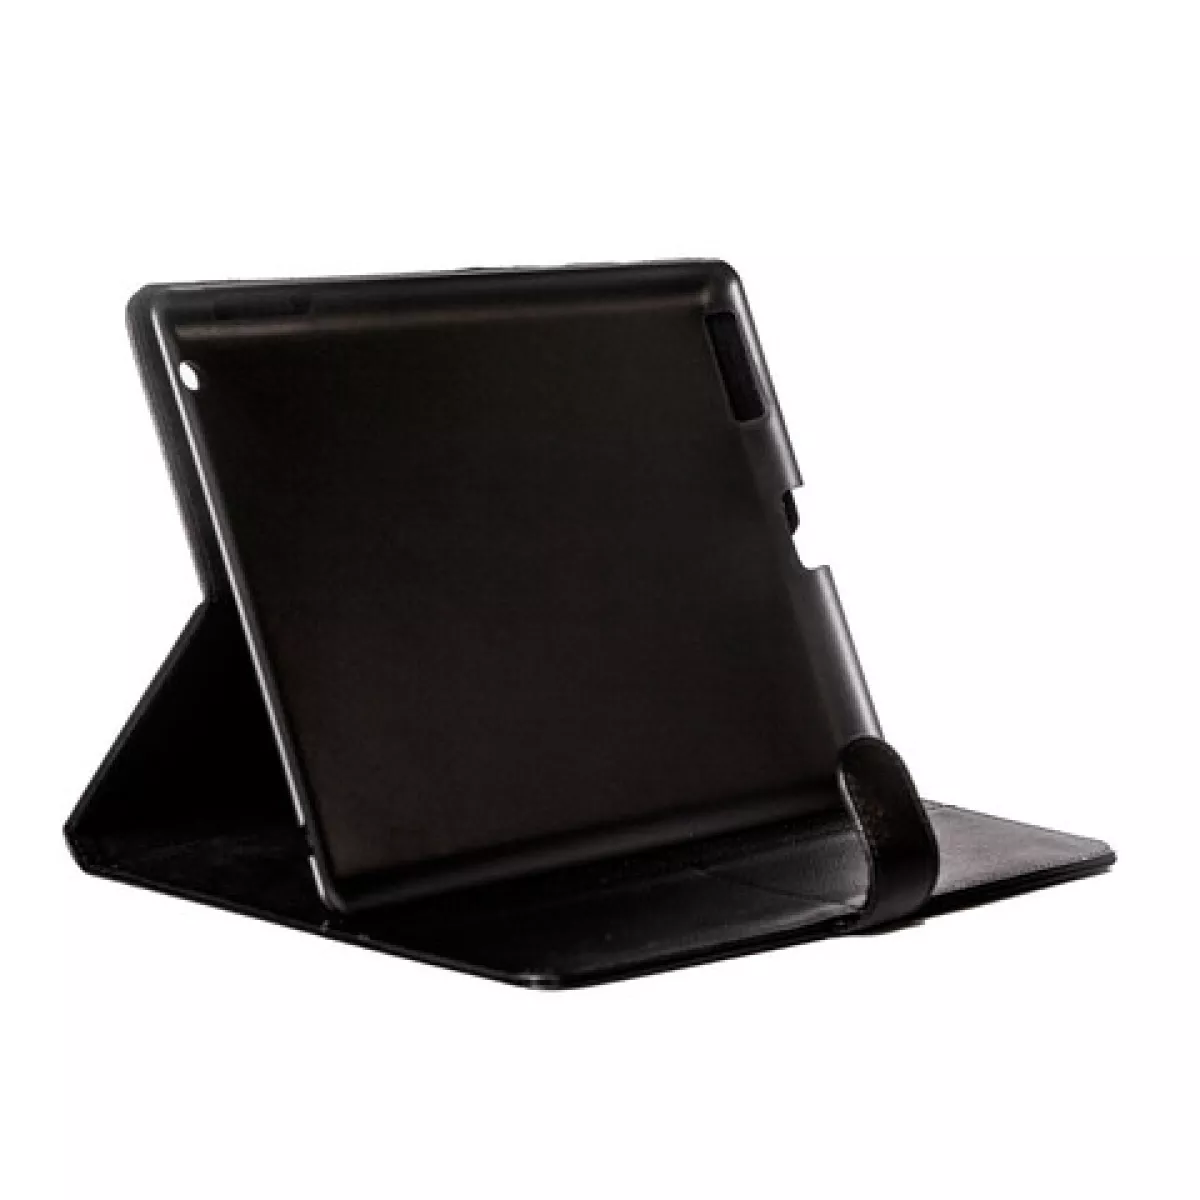 #2 - Radicover Tablet Cover iPad 2/3/4 (Sort)